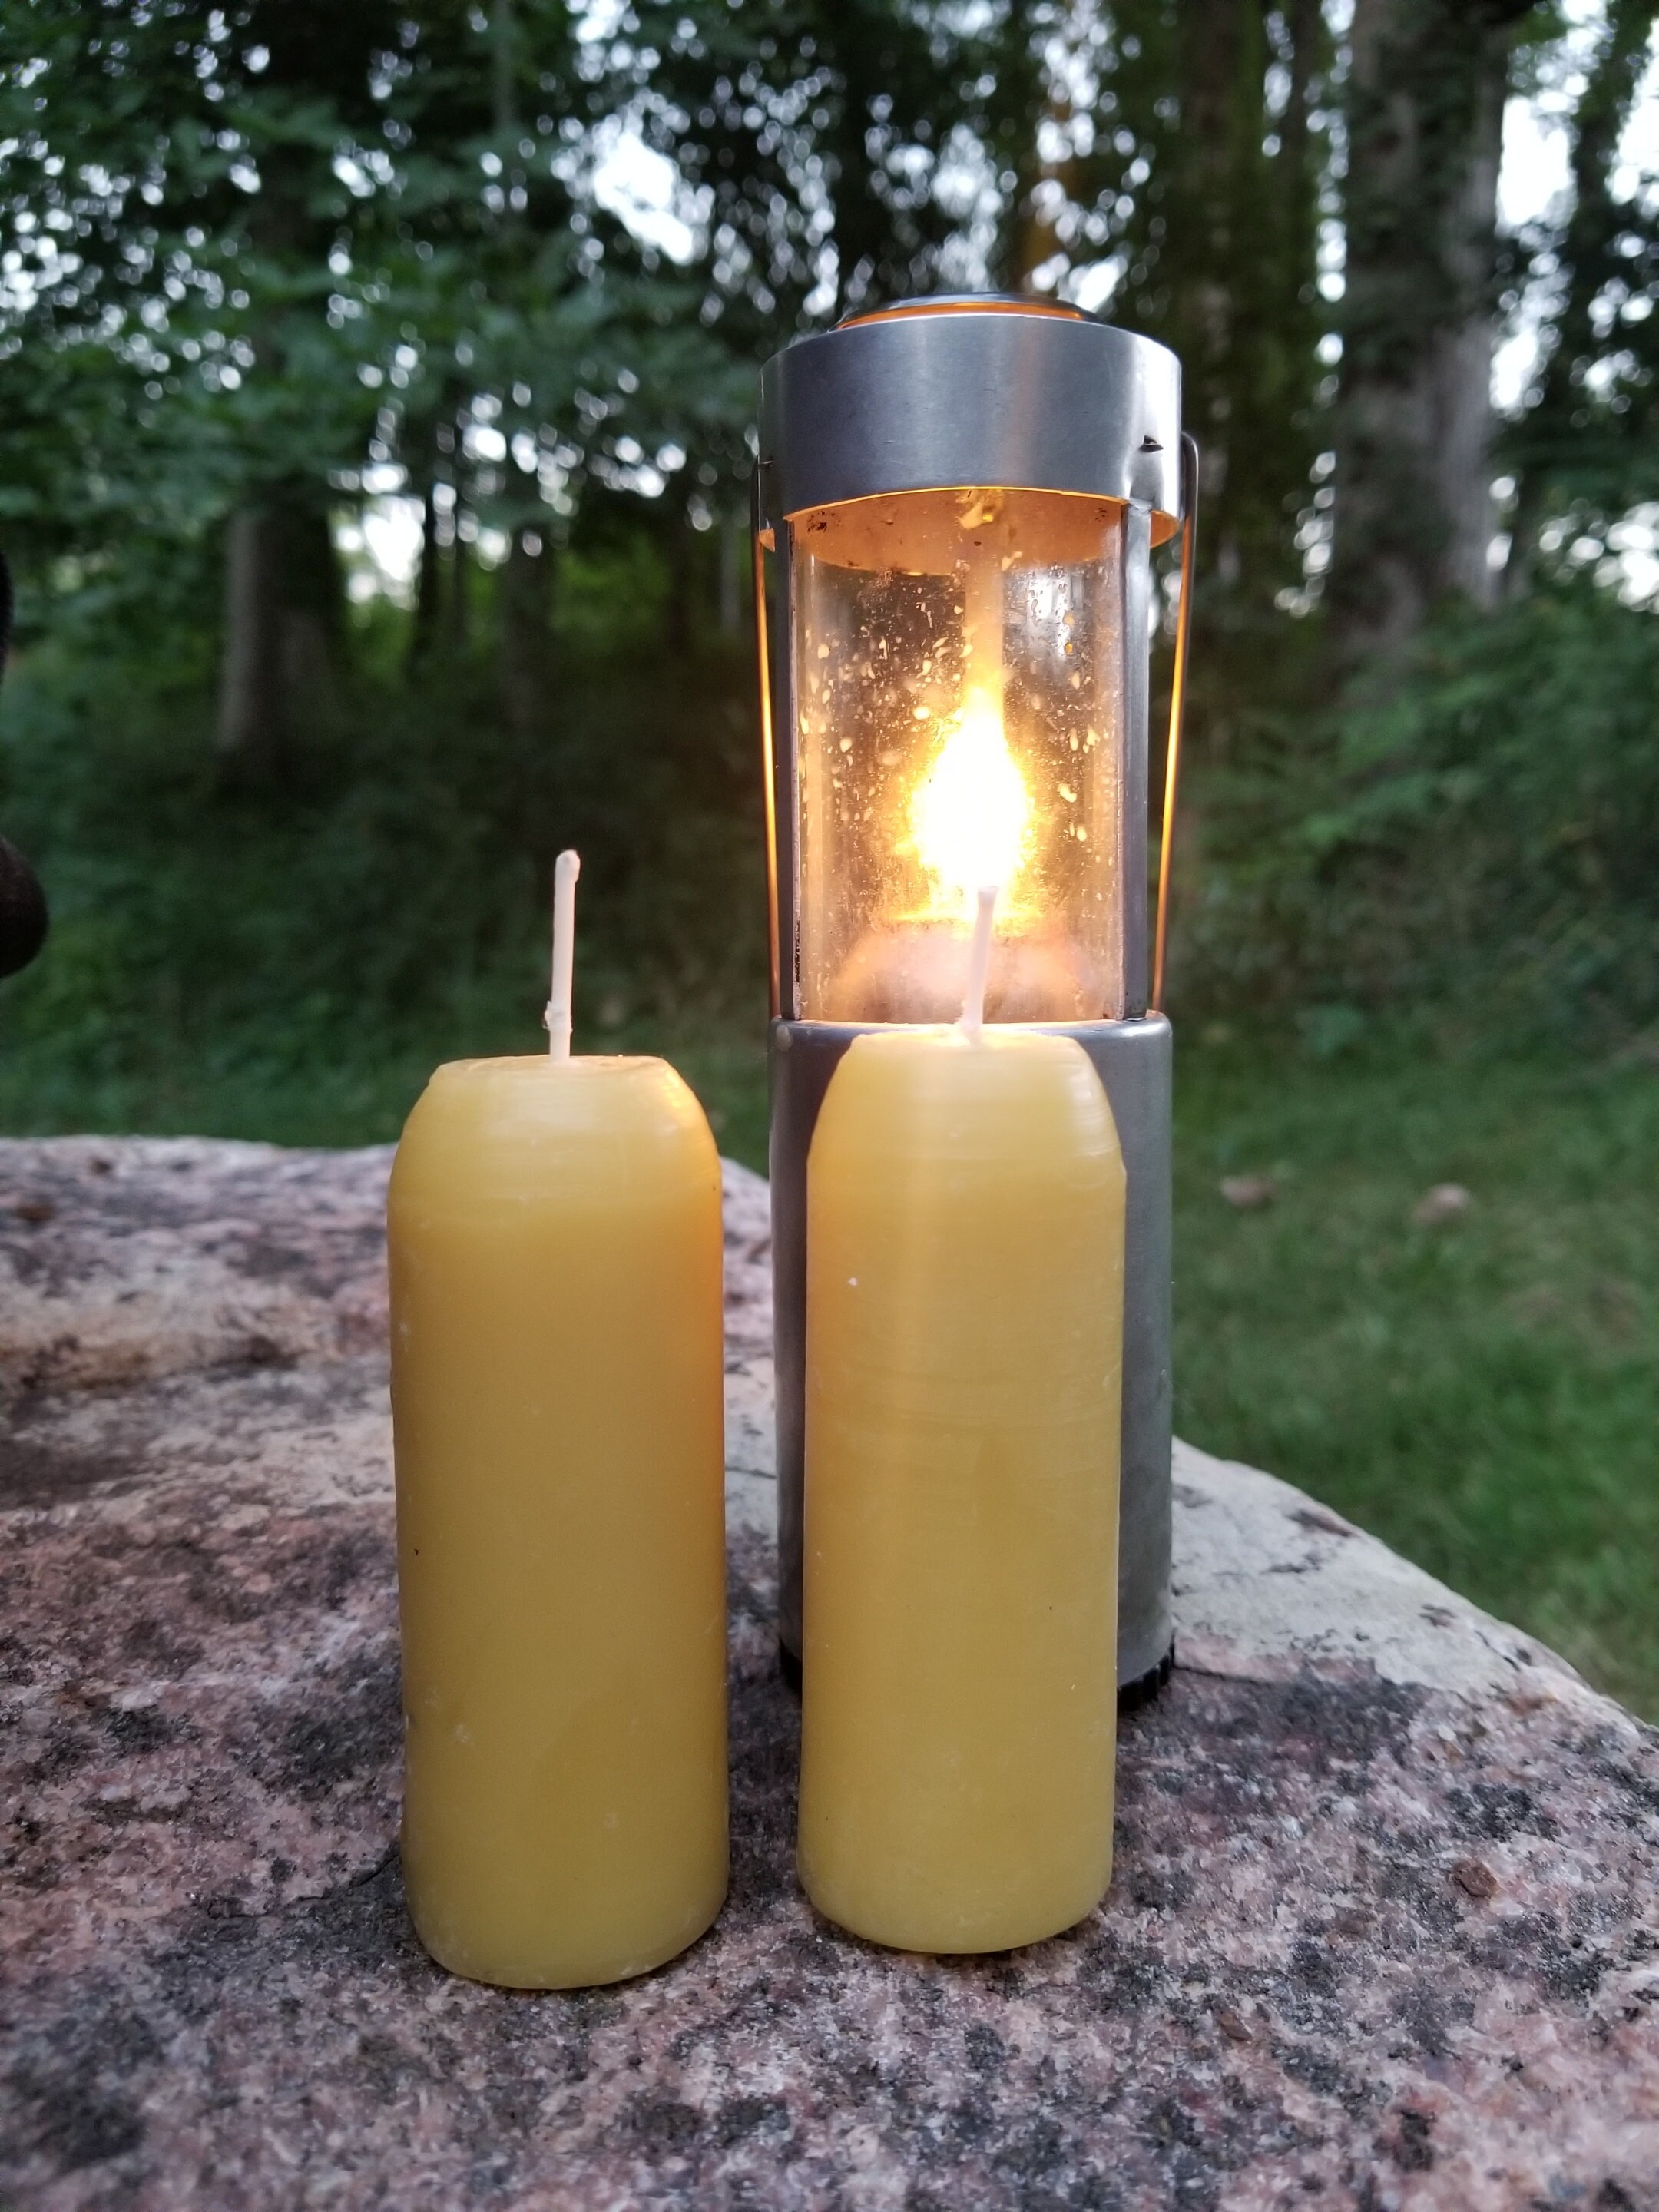 UCO Original Camping Lantern Red or Yellow - Three Beeswax Candle